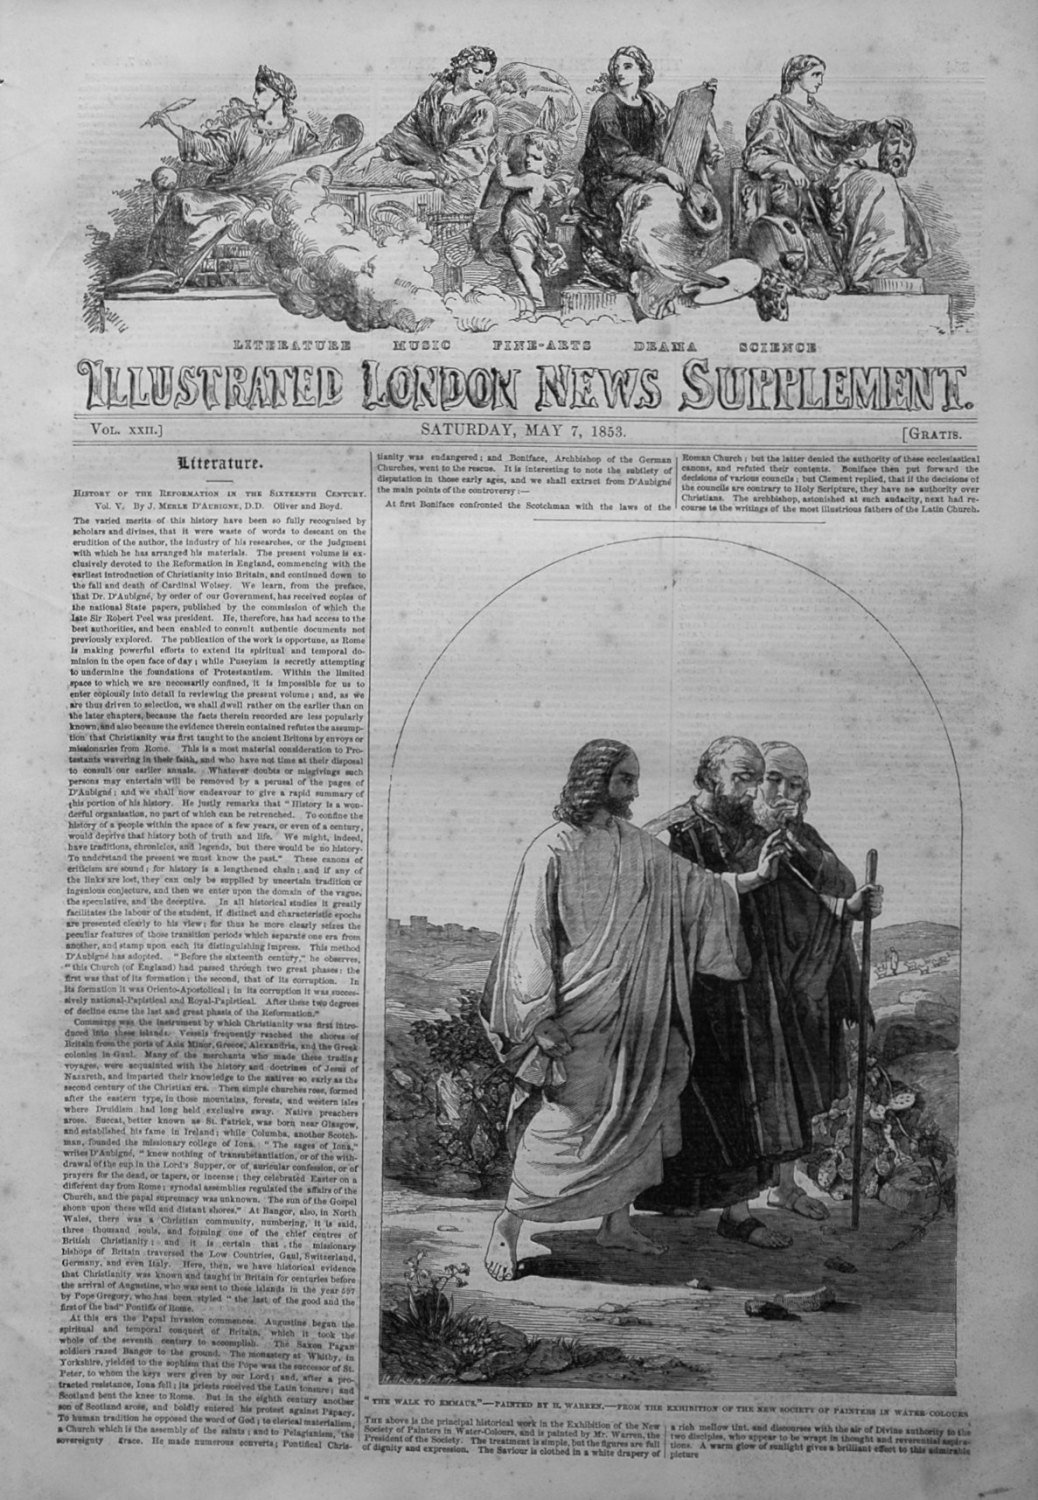 Illustrated London News, Supplement for May 7th, 1853.